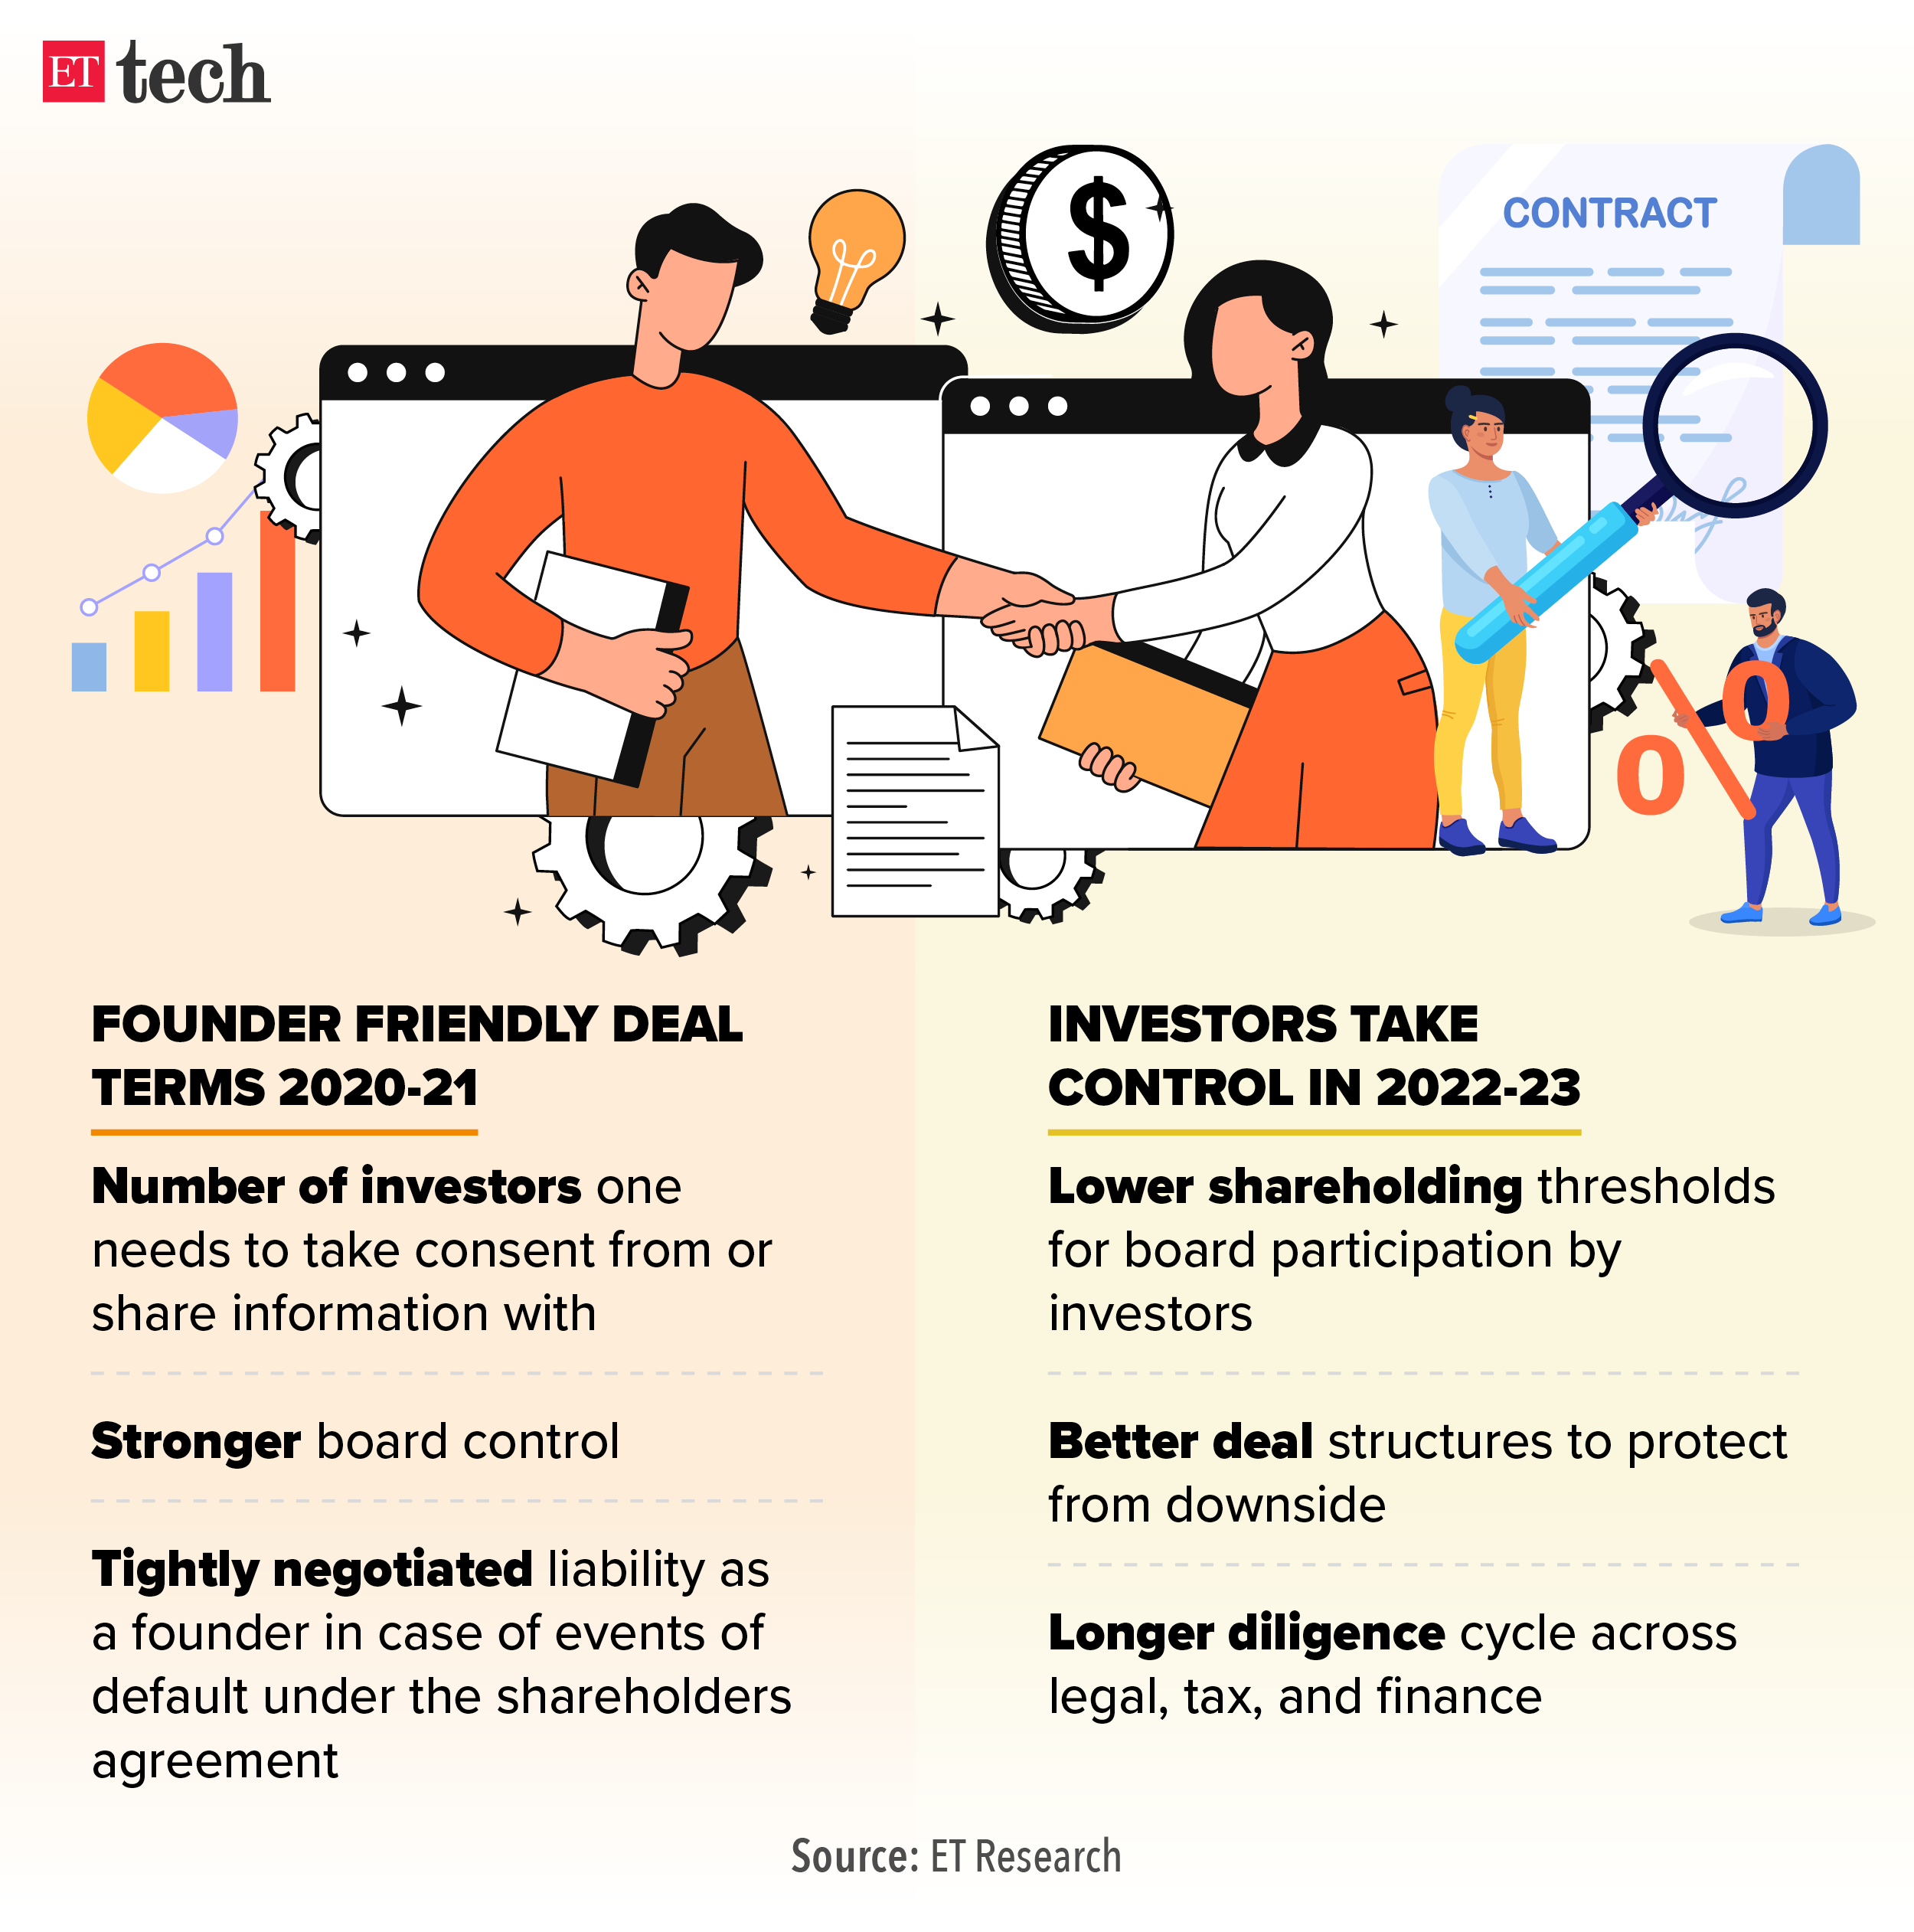 FOUNDER FRIENDLY DEAL TERMS 2020-21_Graphic_ETTECH